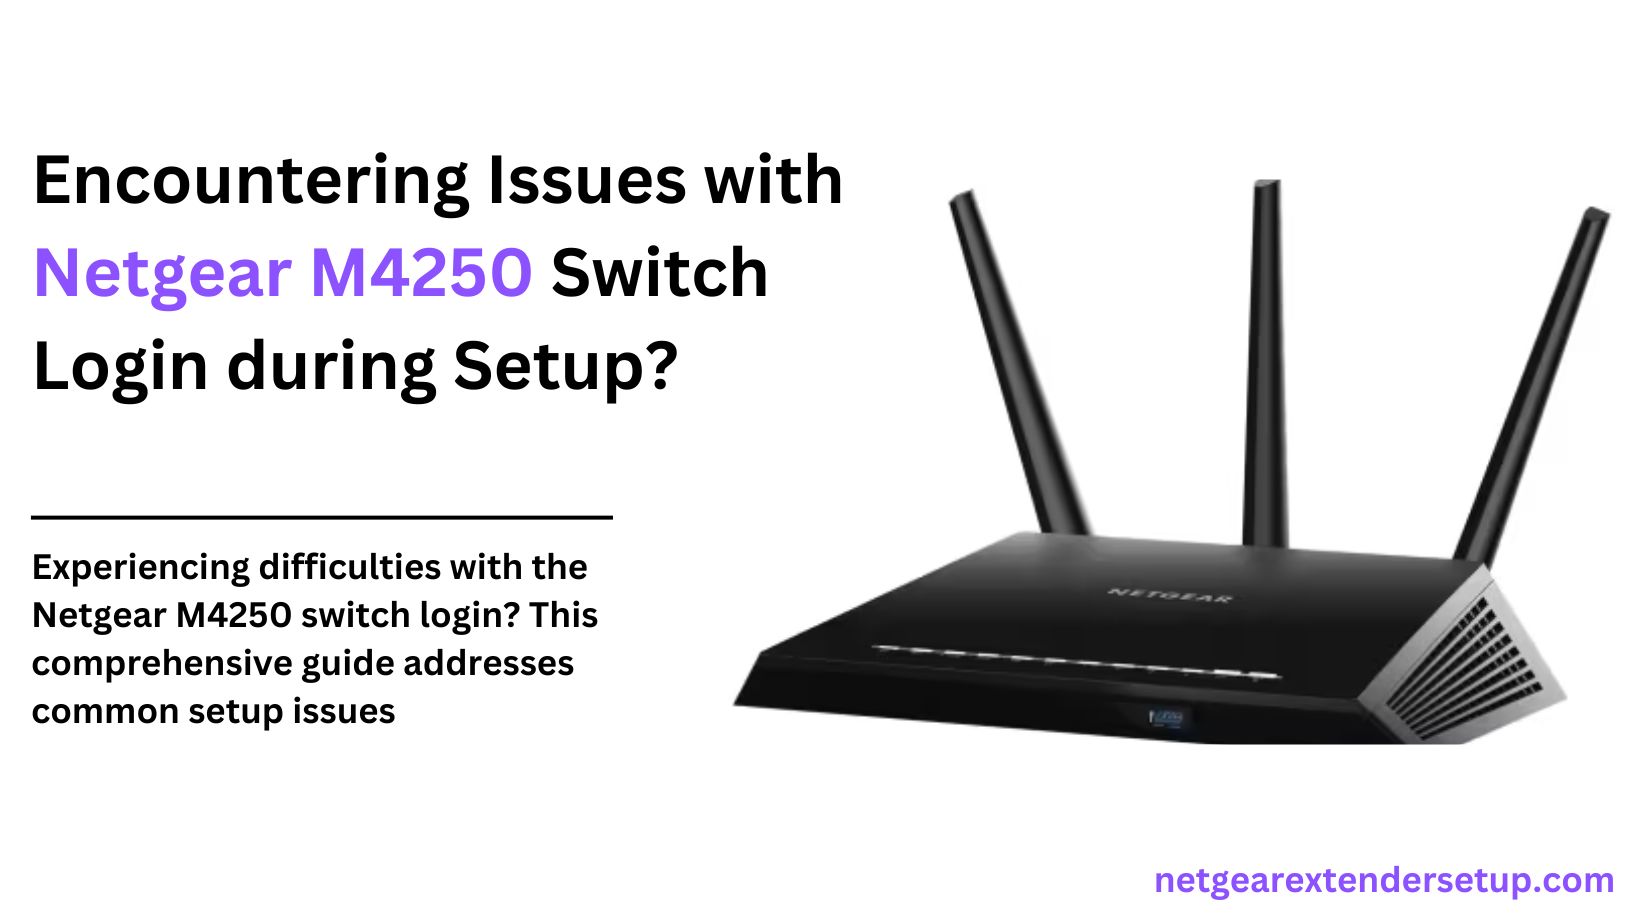 You are currently viewing Encountering Issues with Netgear M4250 Switch Login during Setup?